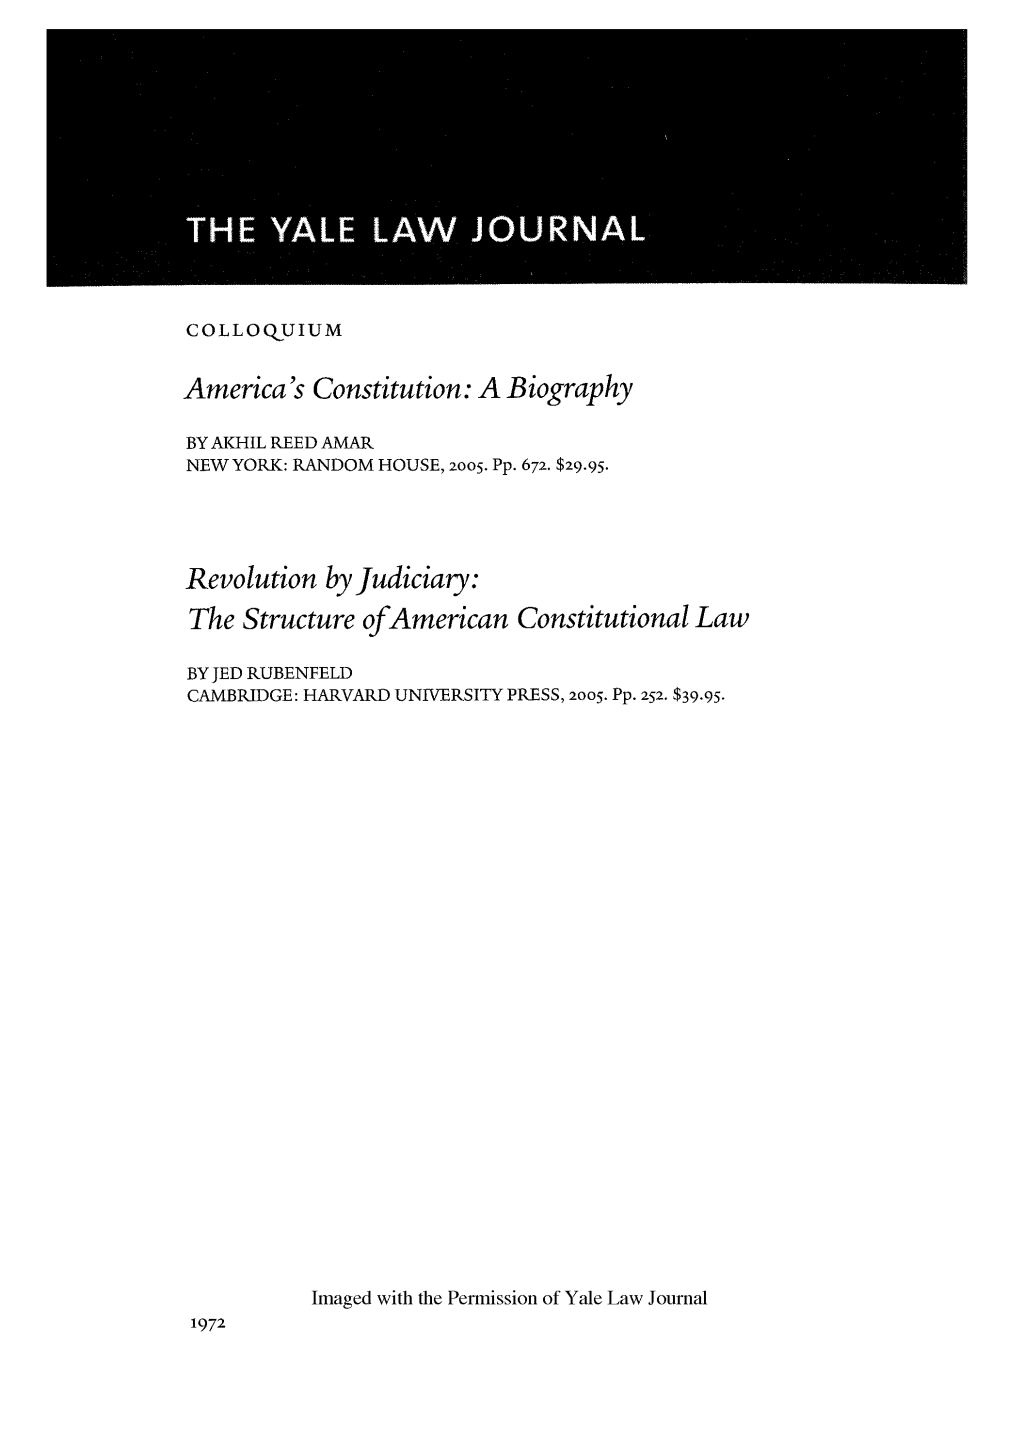 Akhil Reed Amar's America's Constitution and Jed Rubenfeld's